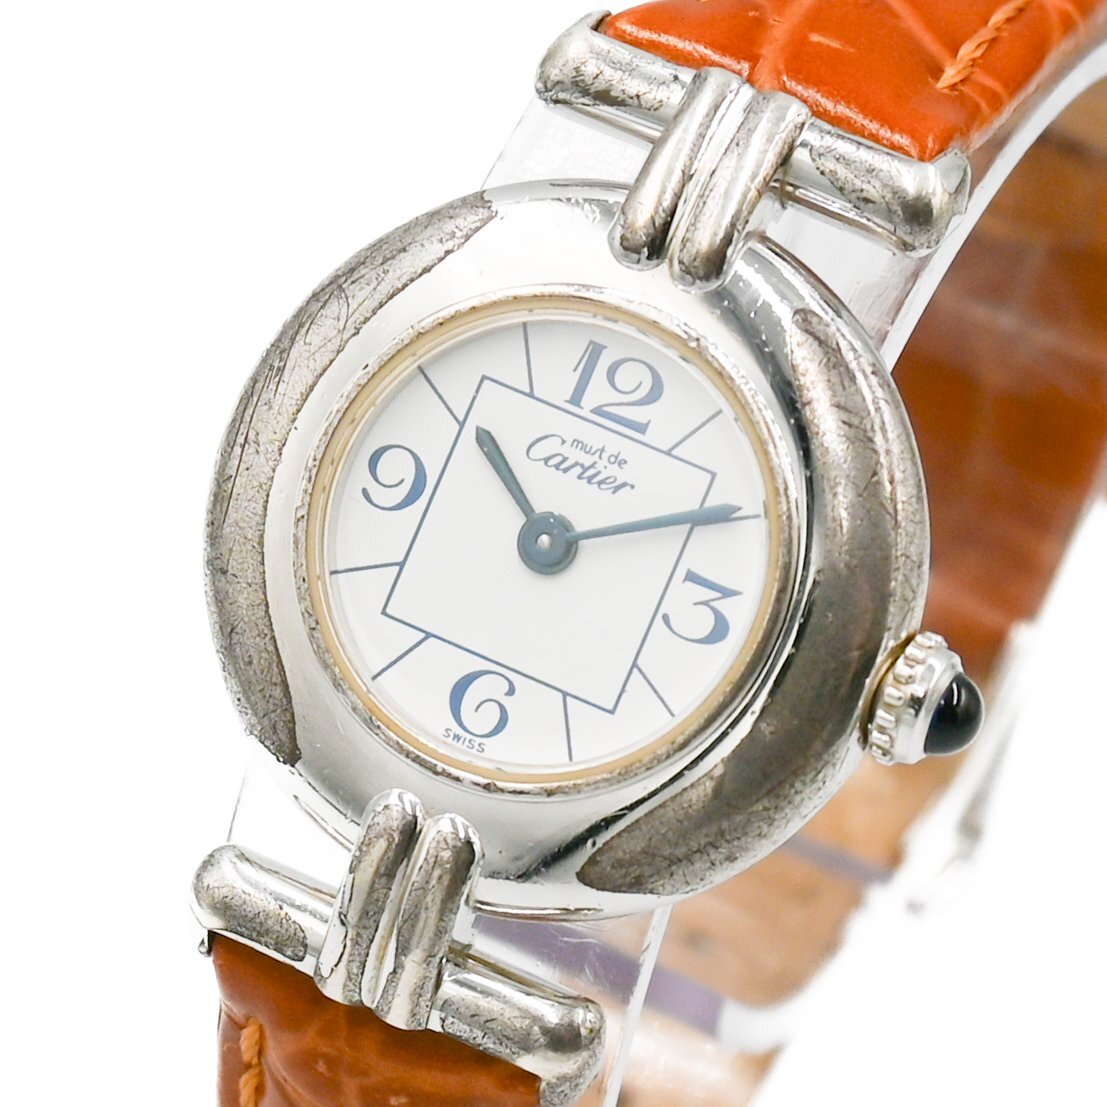 1 jpy operation Cartier Cartier Must ko Rize W1011455 2411 SV925 QZ quarts white face silver lady's wristwatch brand 340520240507